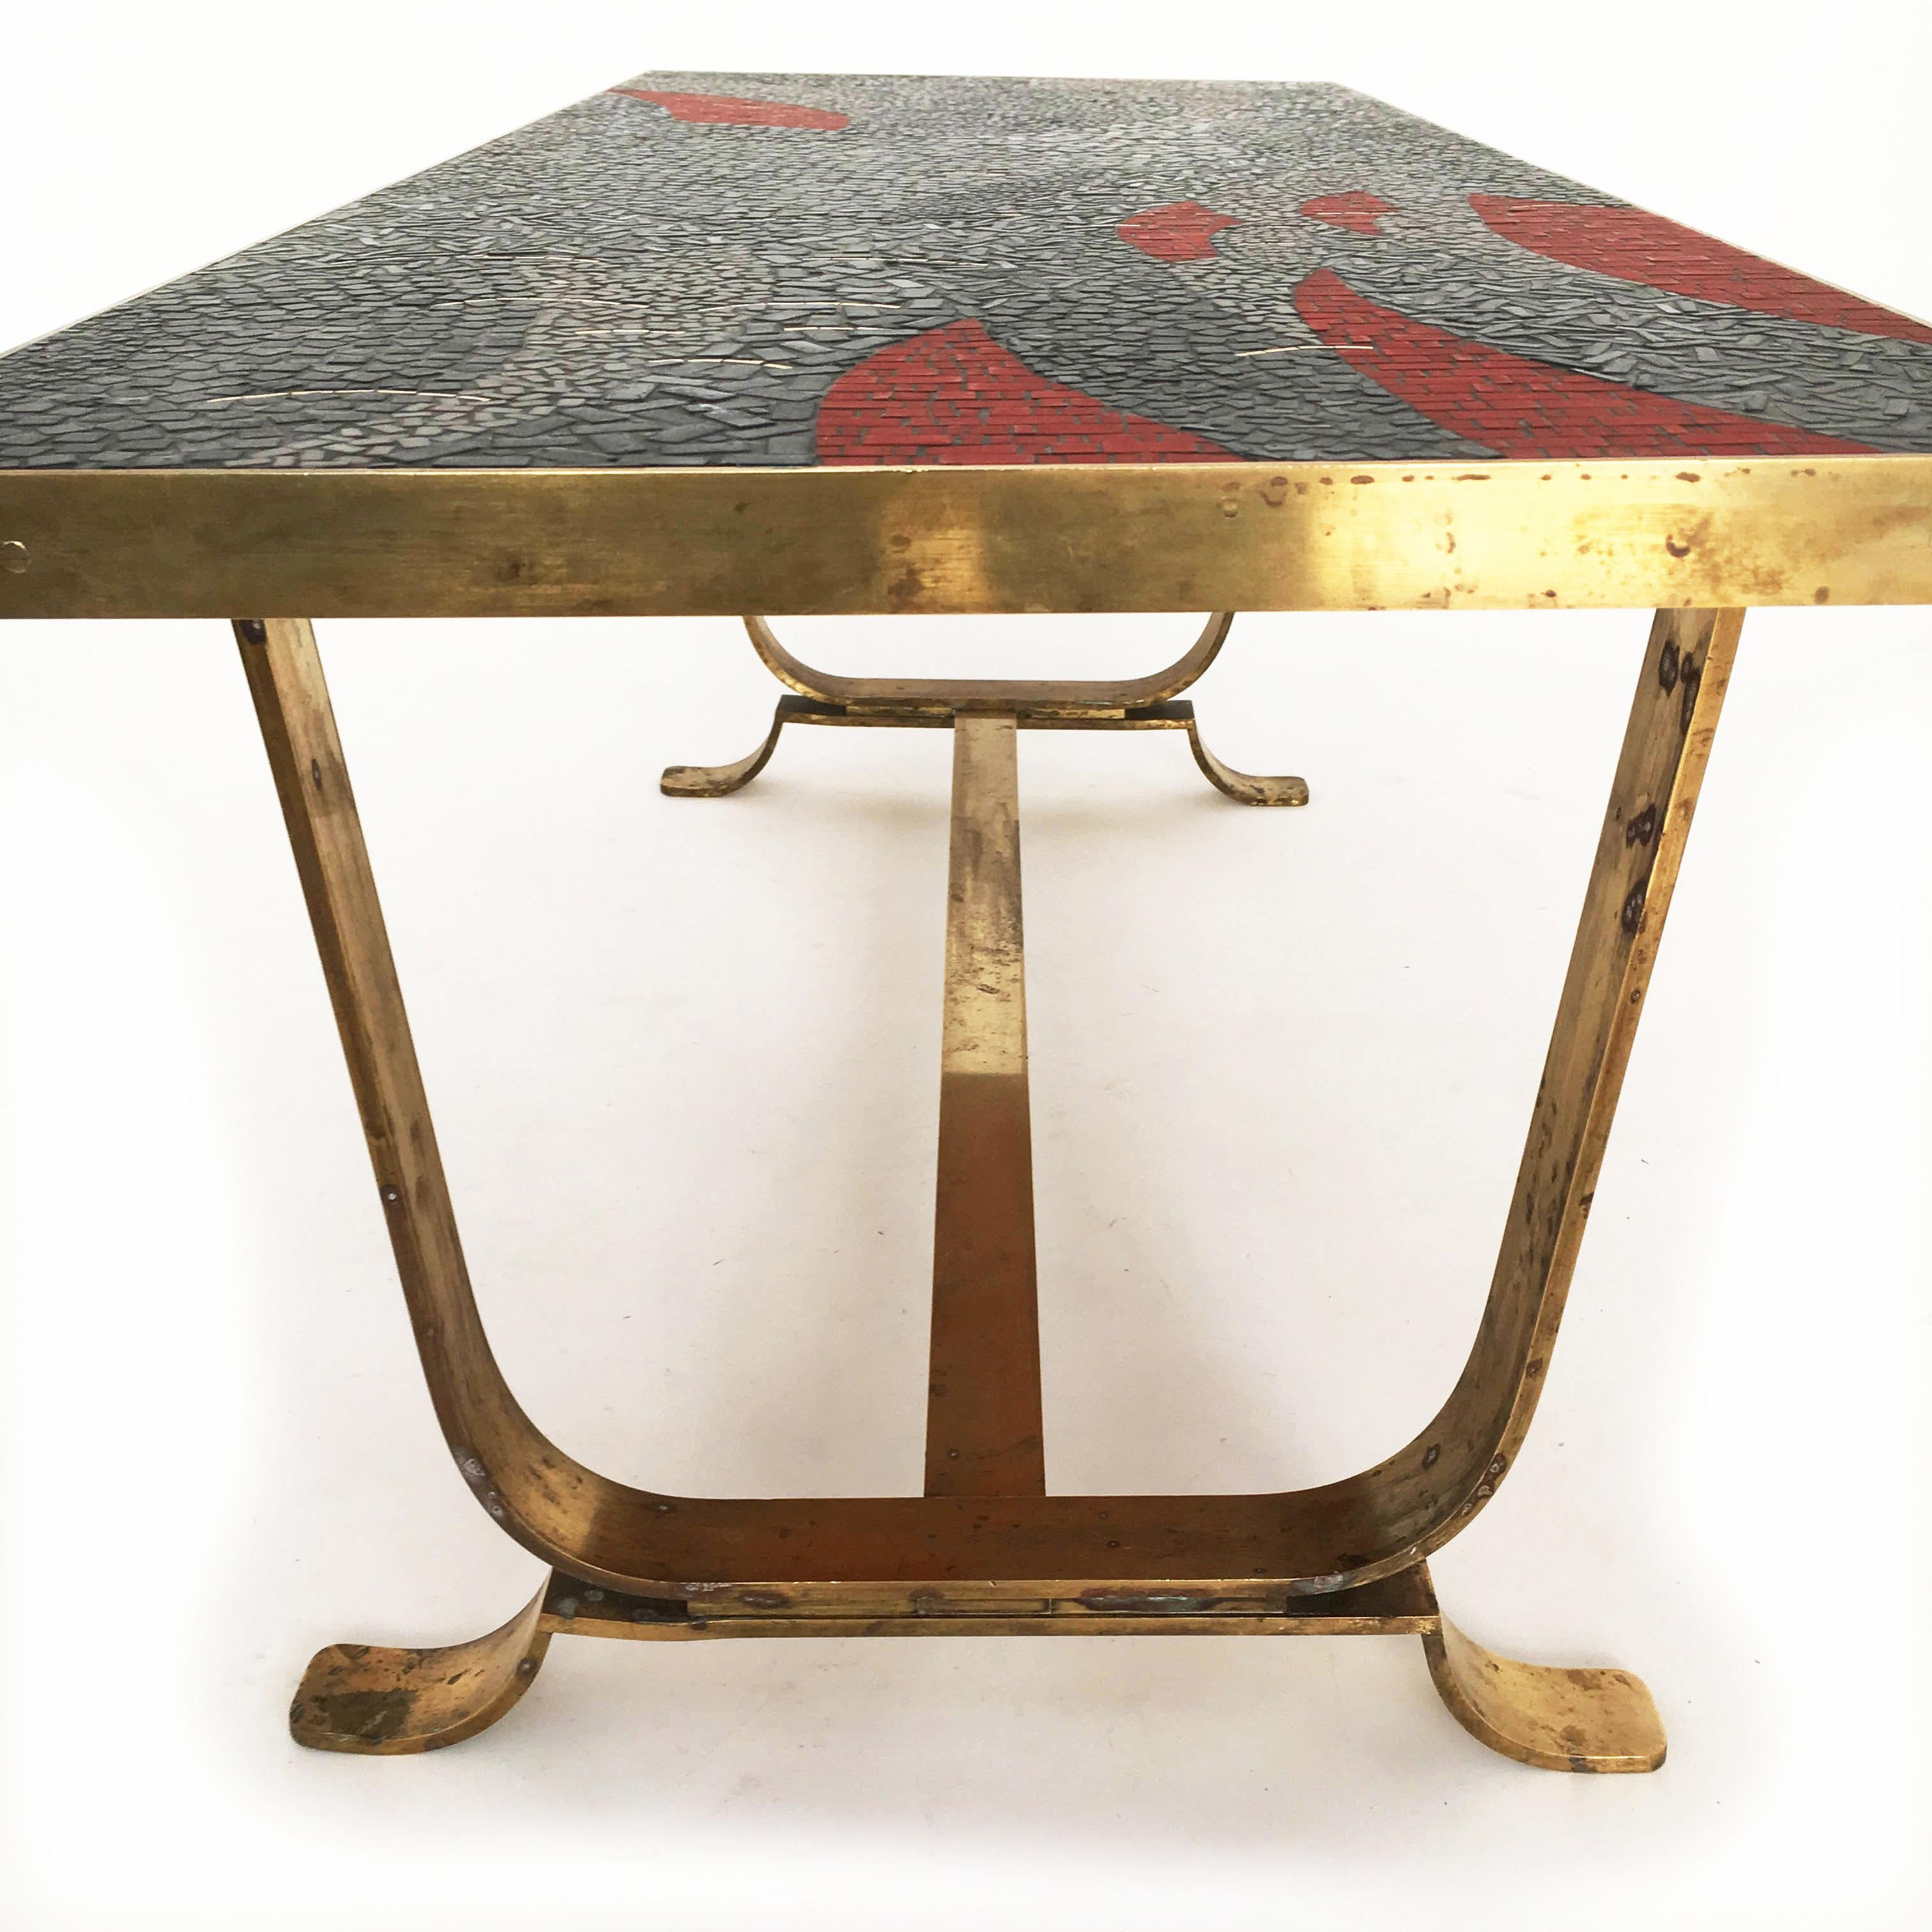 Berthold Müller Mosaic Coffee Cocktail Table, Germany 1950s For Sale 6